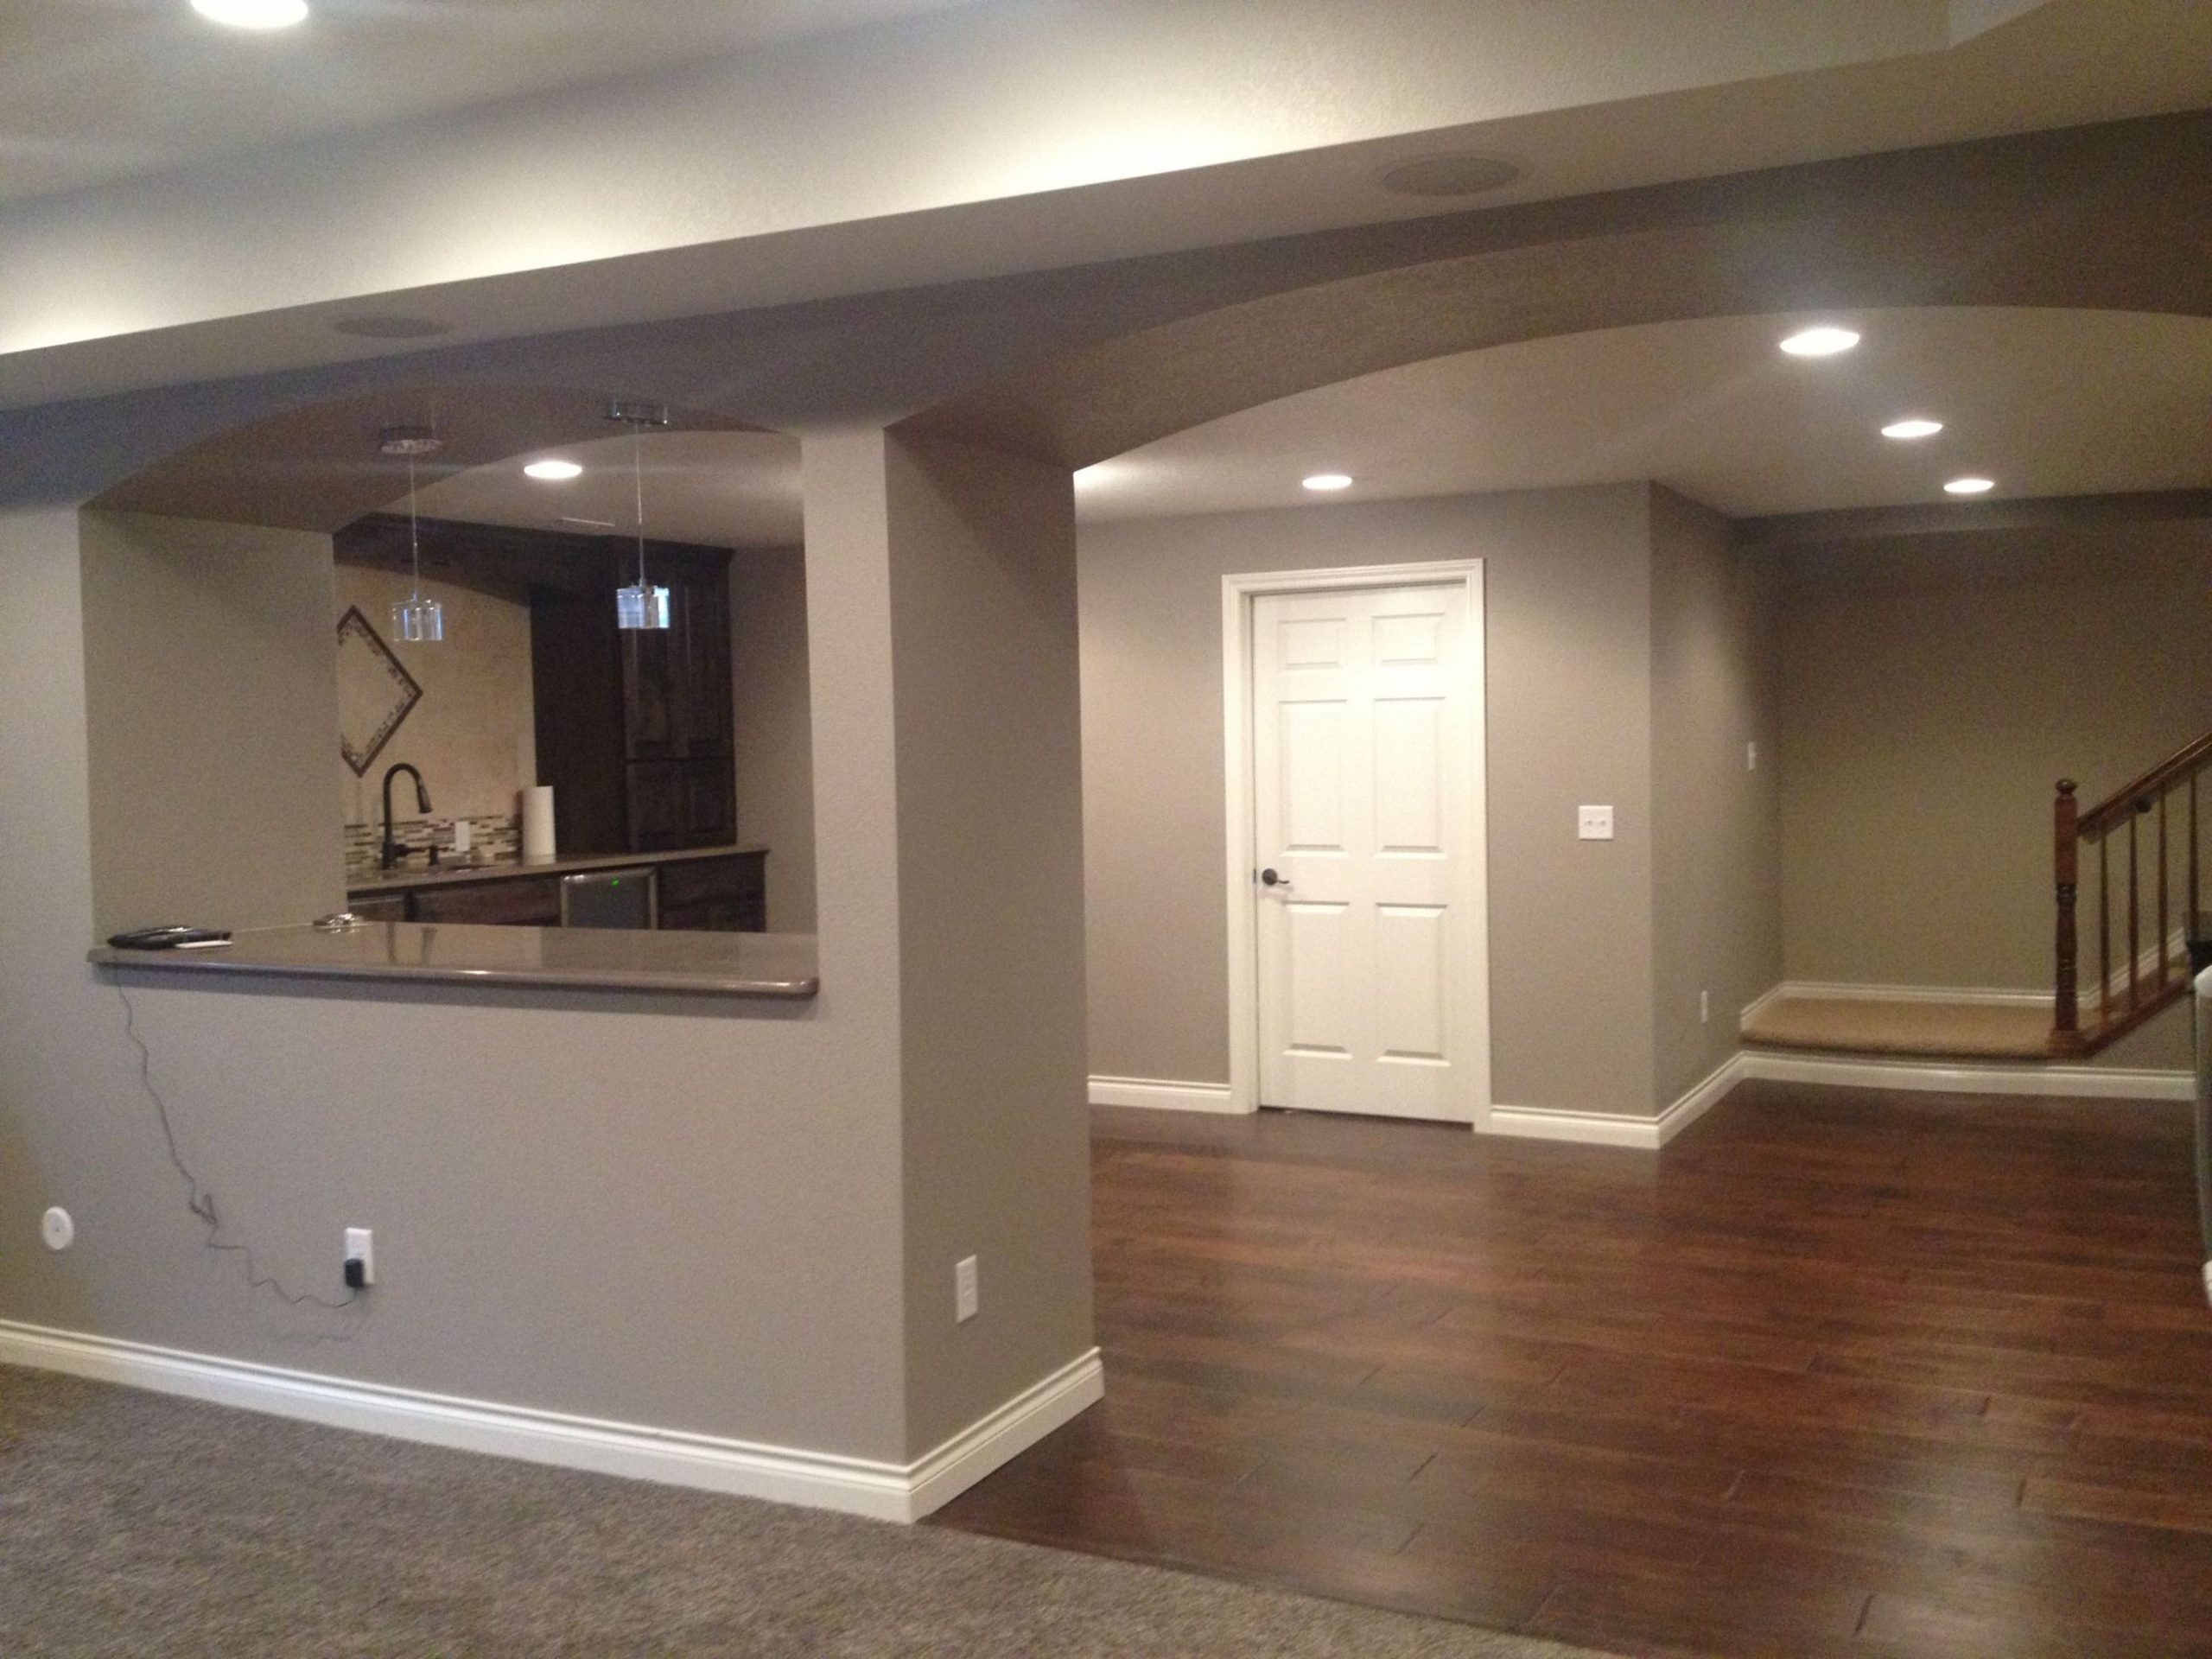 Awesome Basement Floor And Wall Color Ideas 